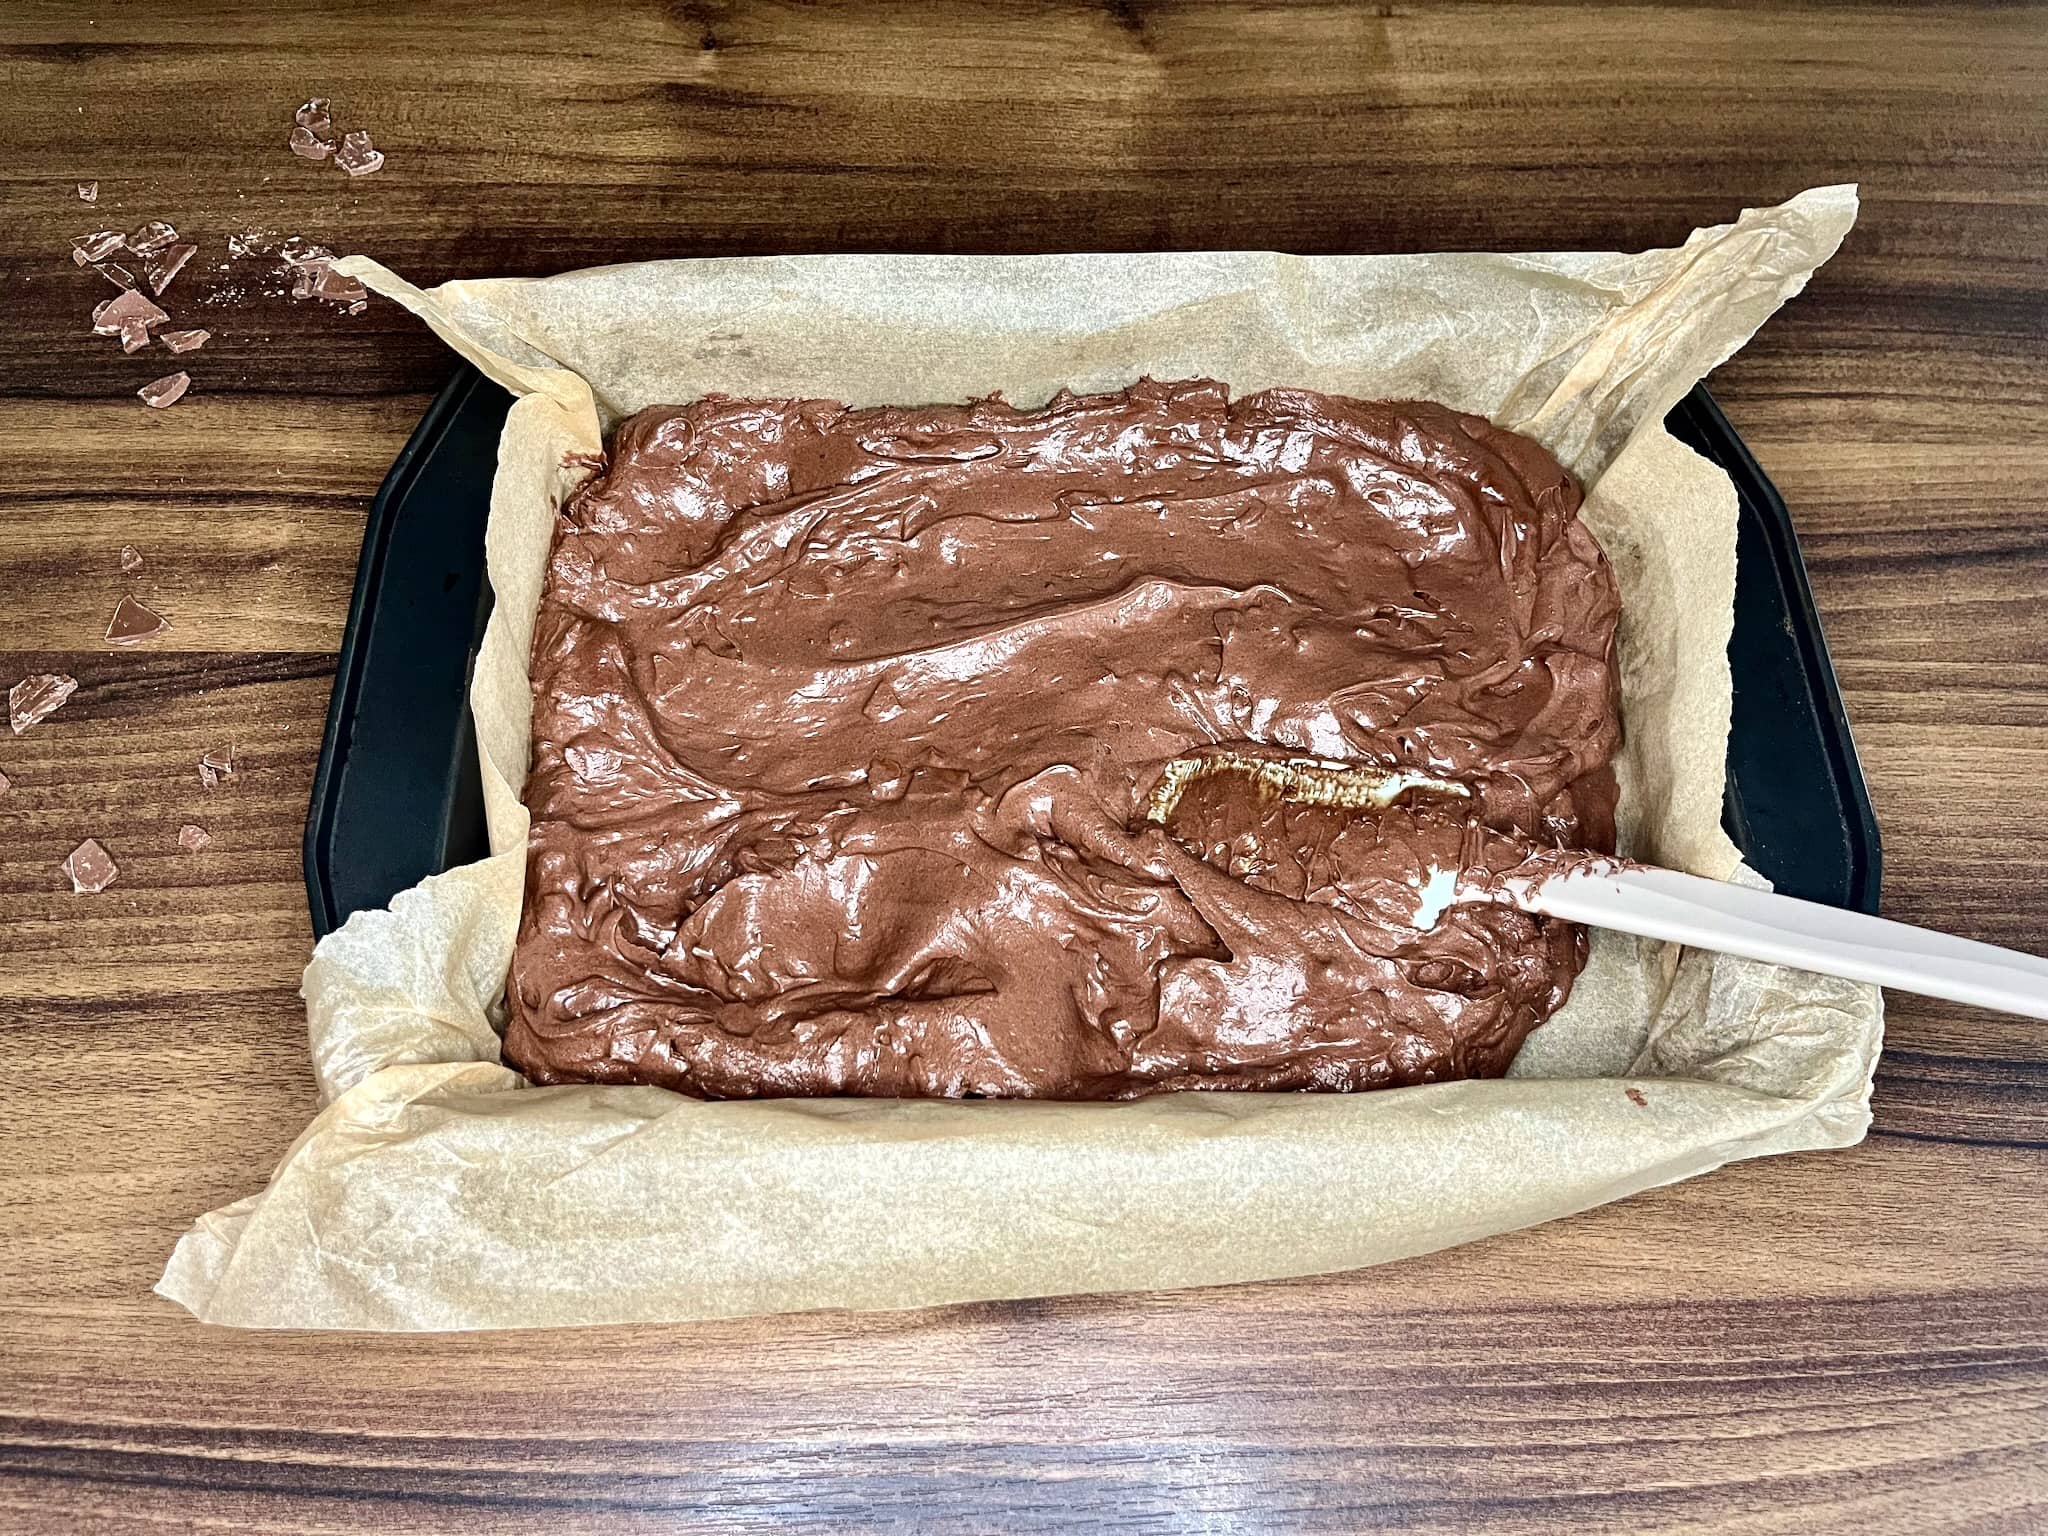 Spreading the brownie batter evenly across the prepared baking tray